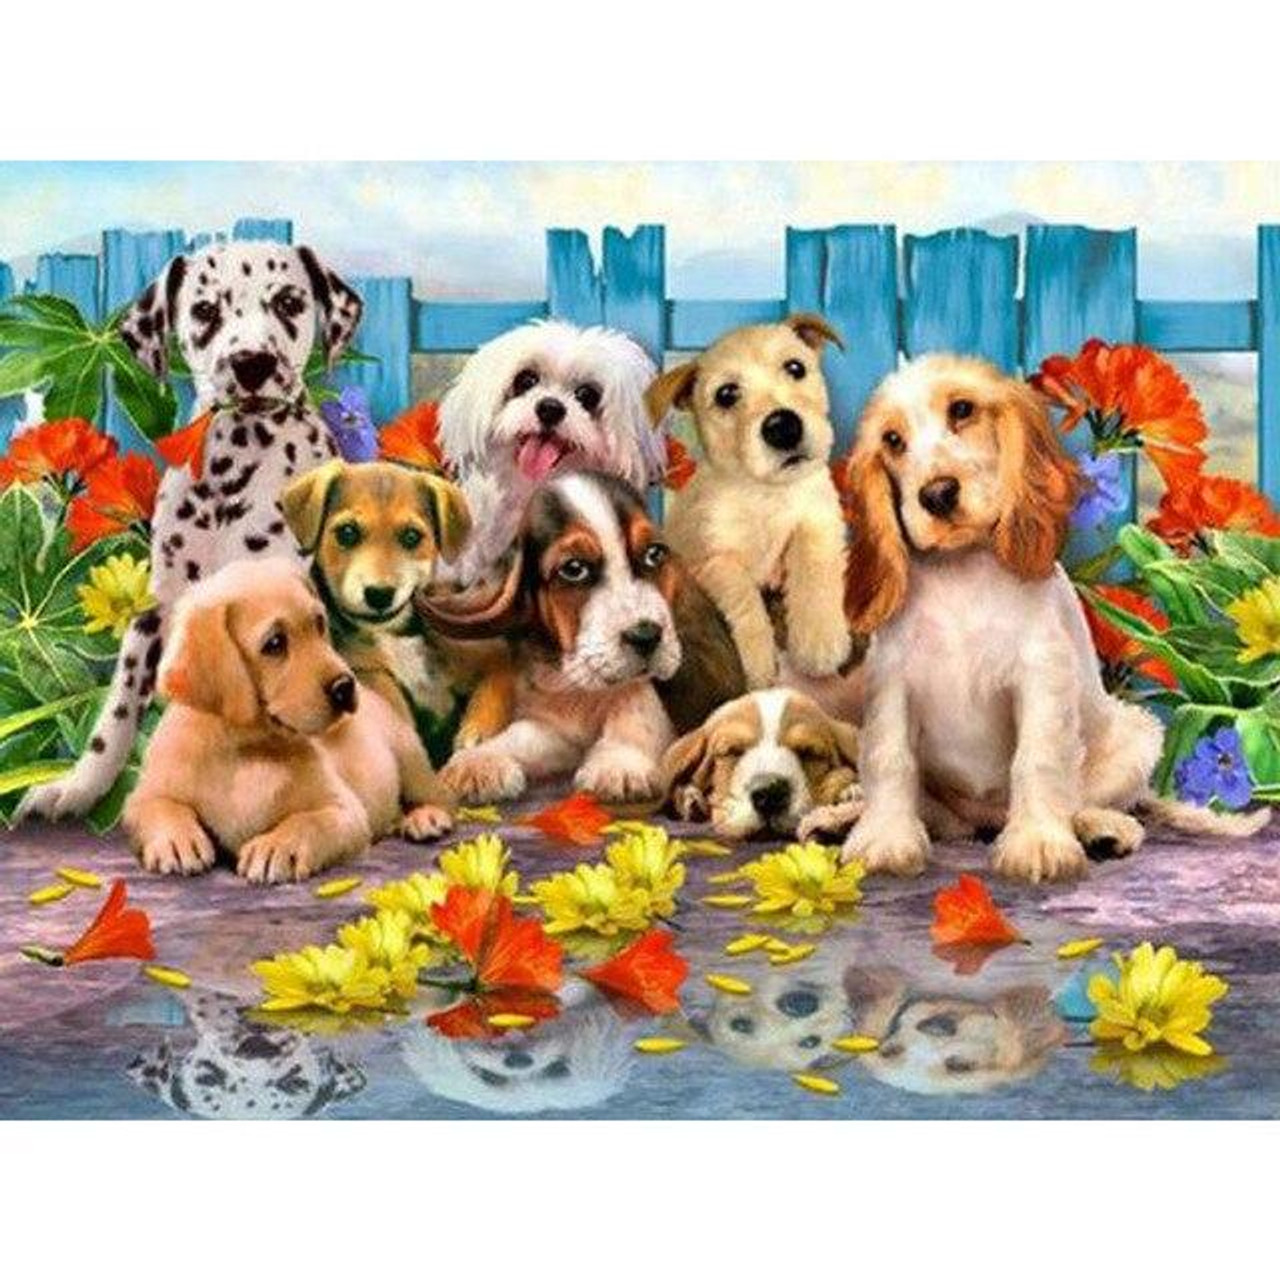 5D Diamond Painting Eight Dogs by the Blue Fence Kit